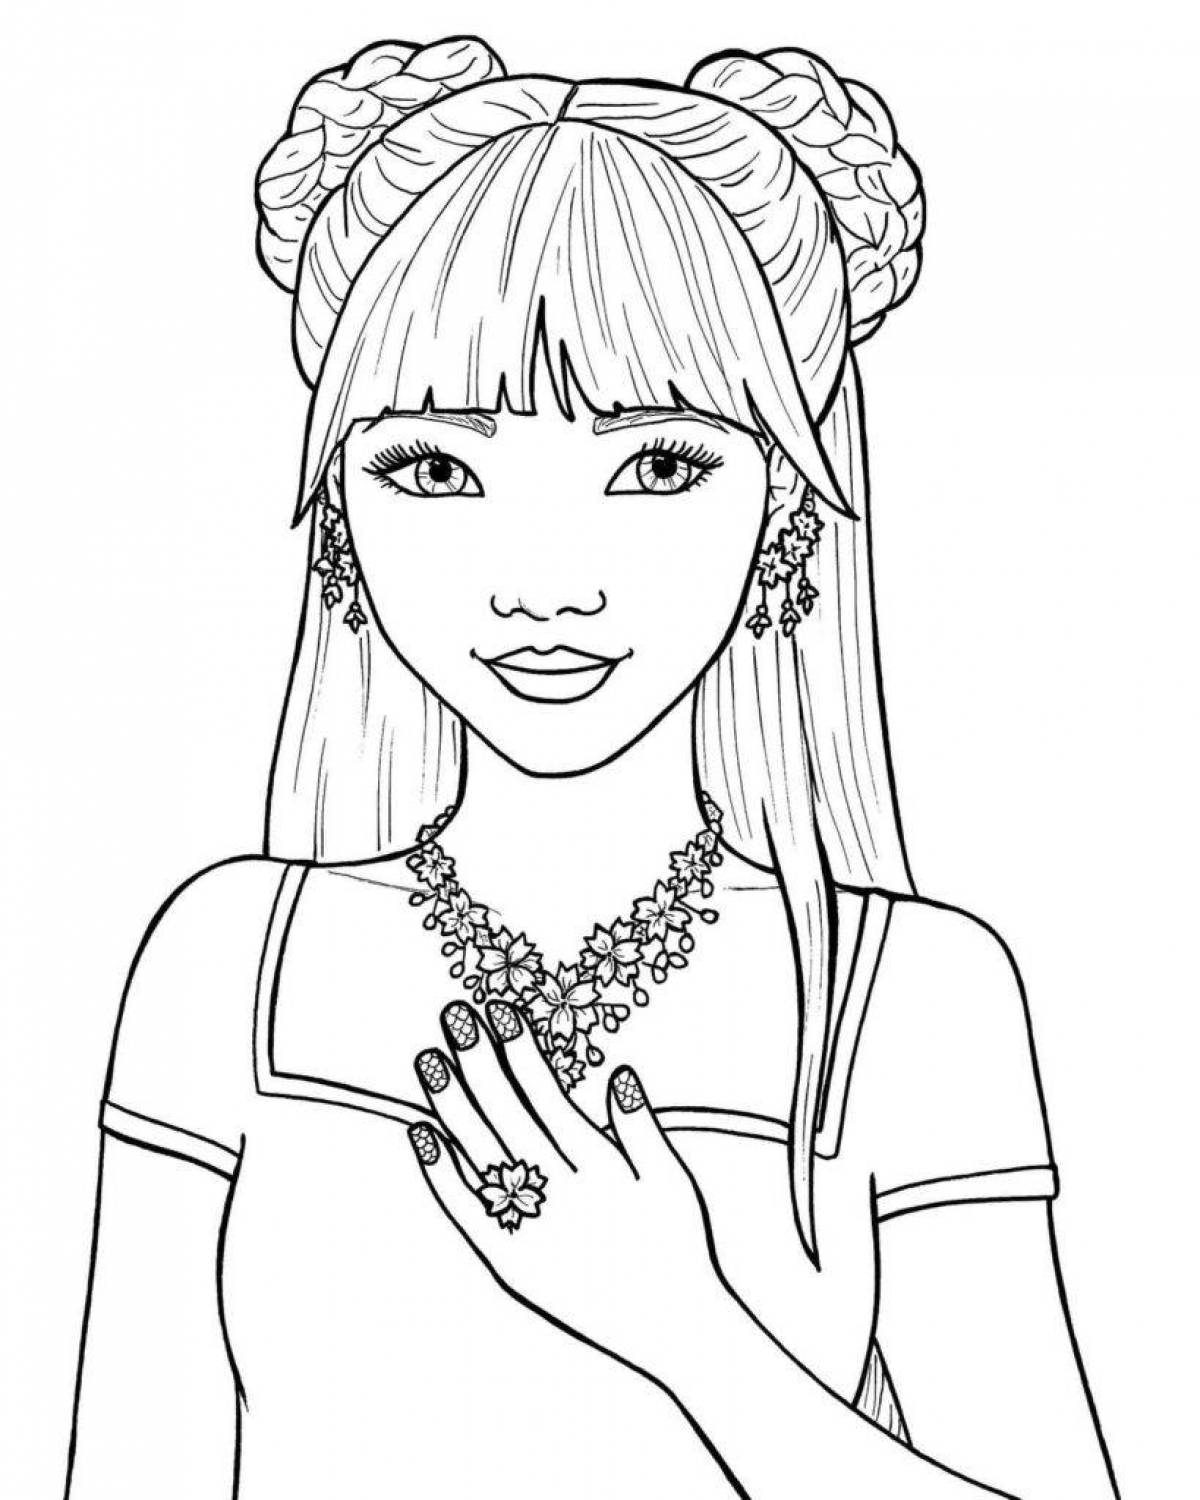 Amazing 12 year old coloring page